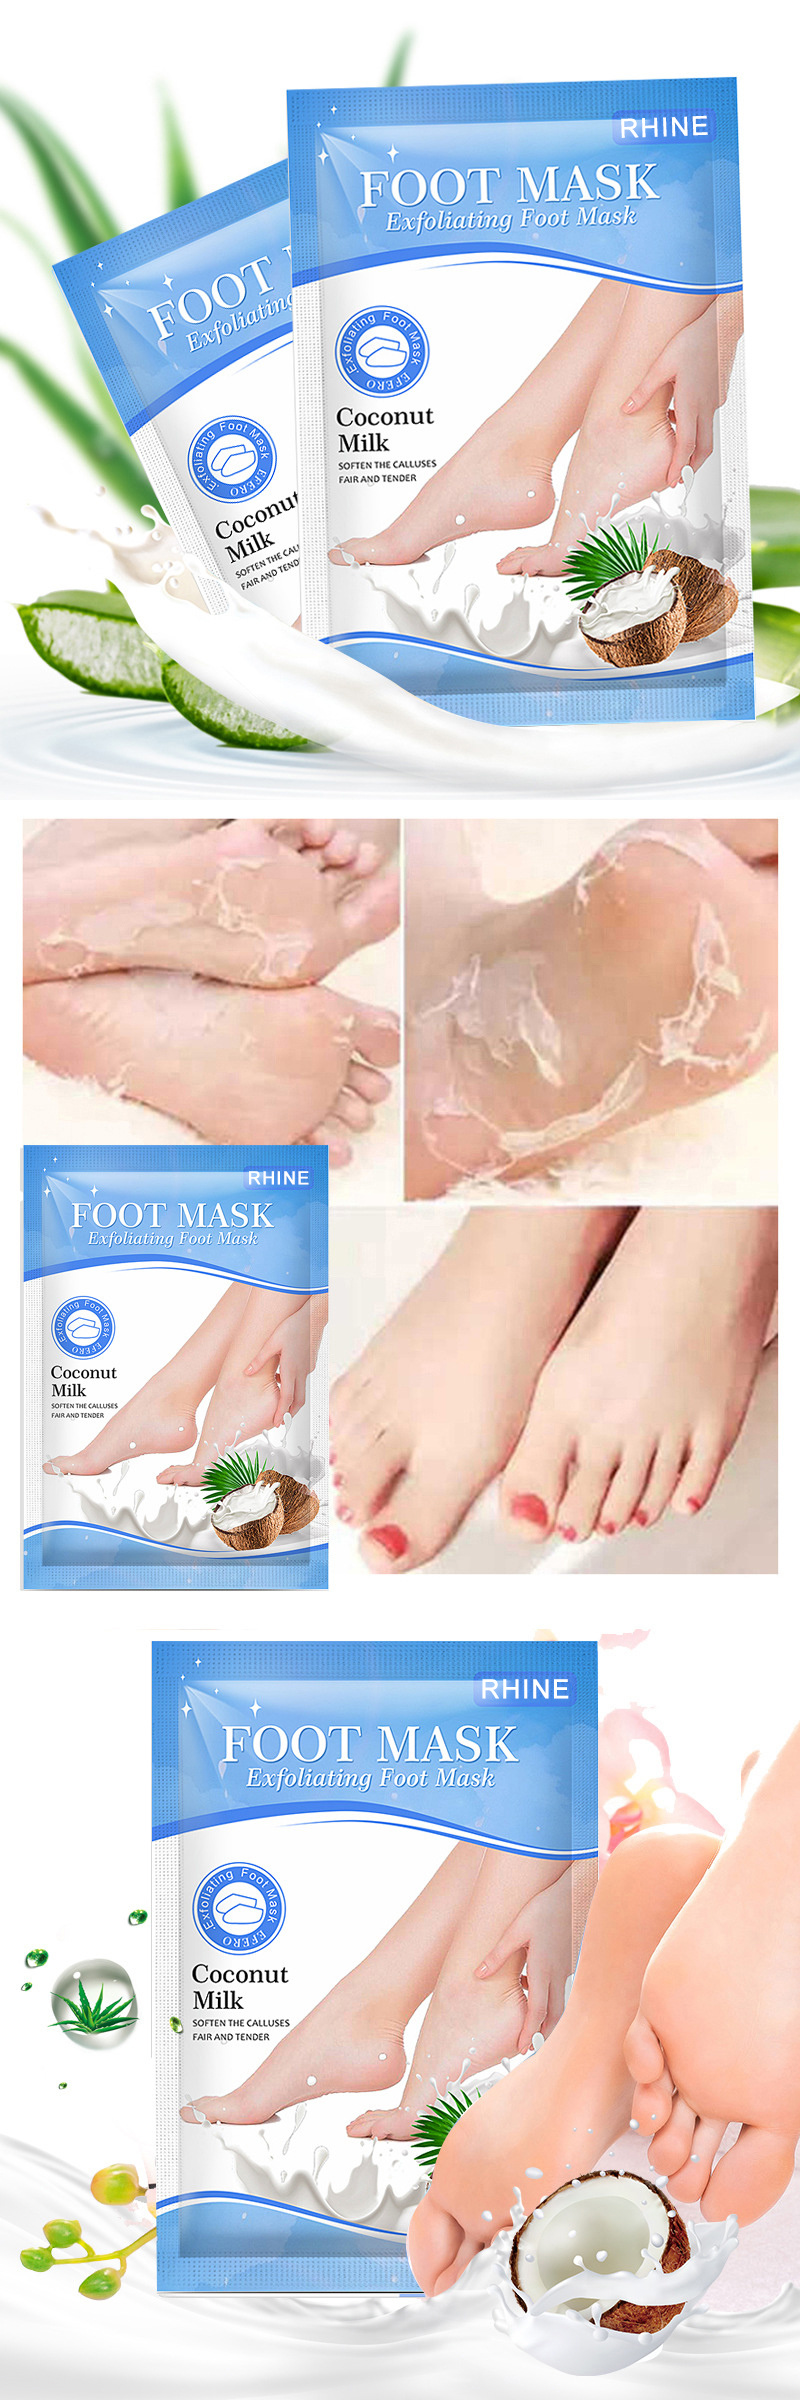 Exfoliating Foot Mask Cosmetics Acne Cleanser Best Serum for Acne